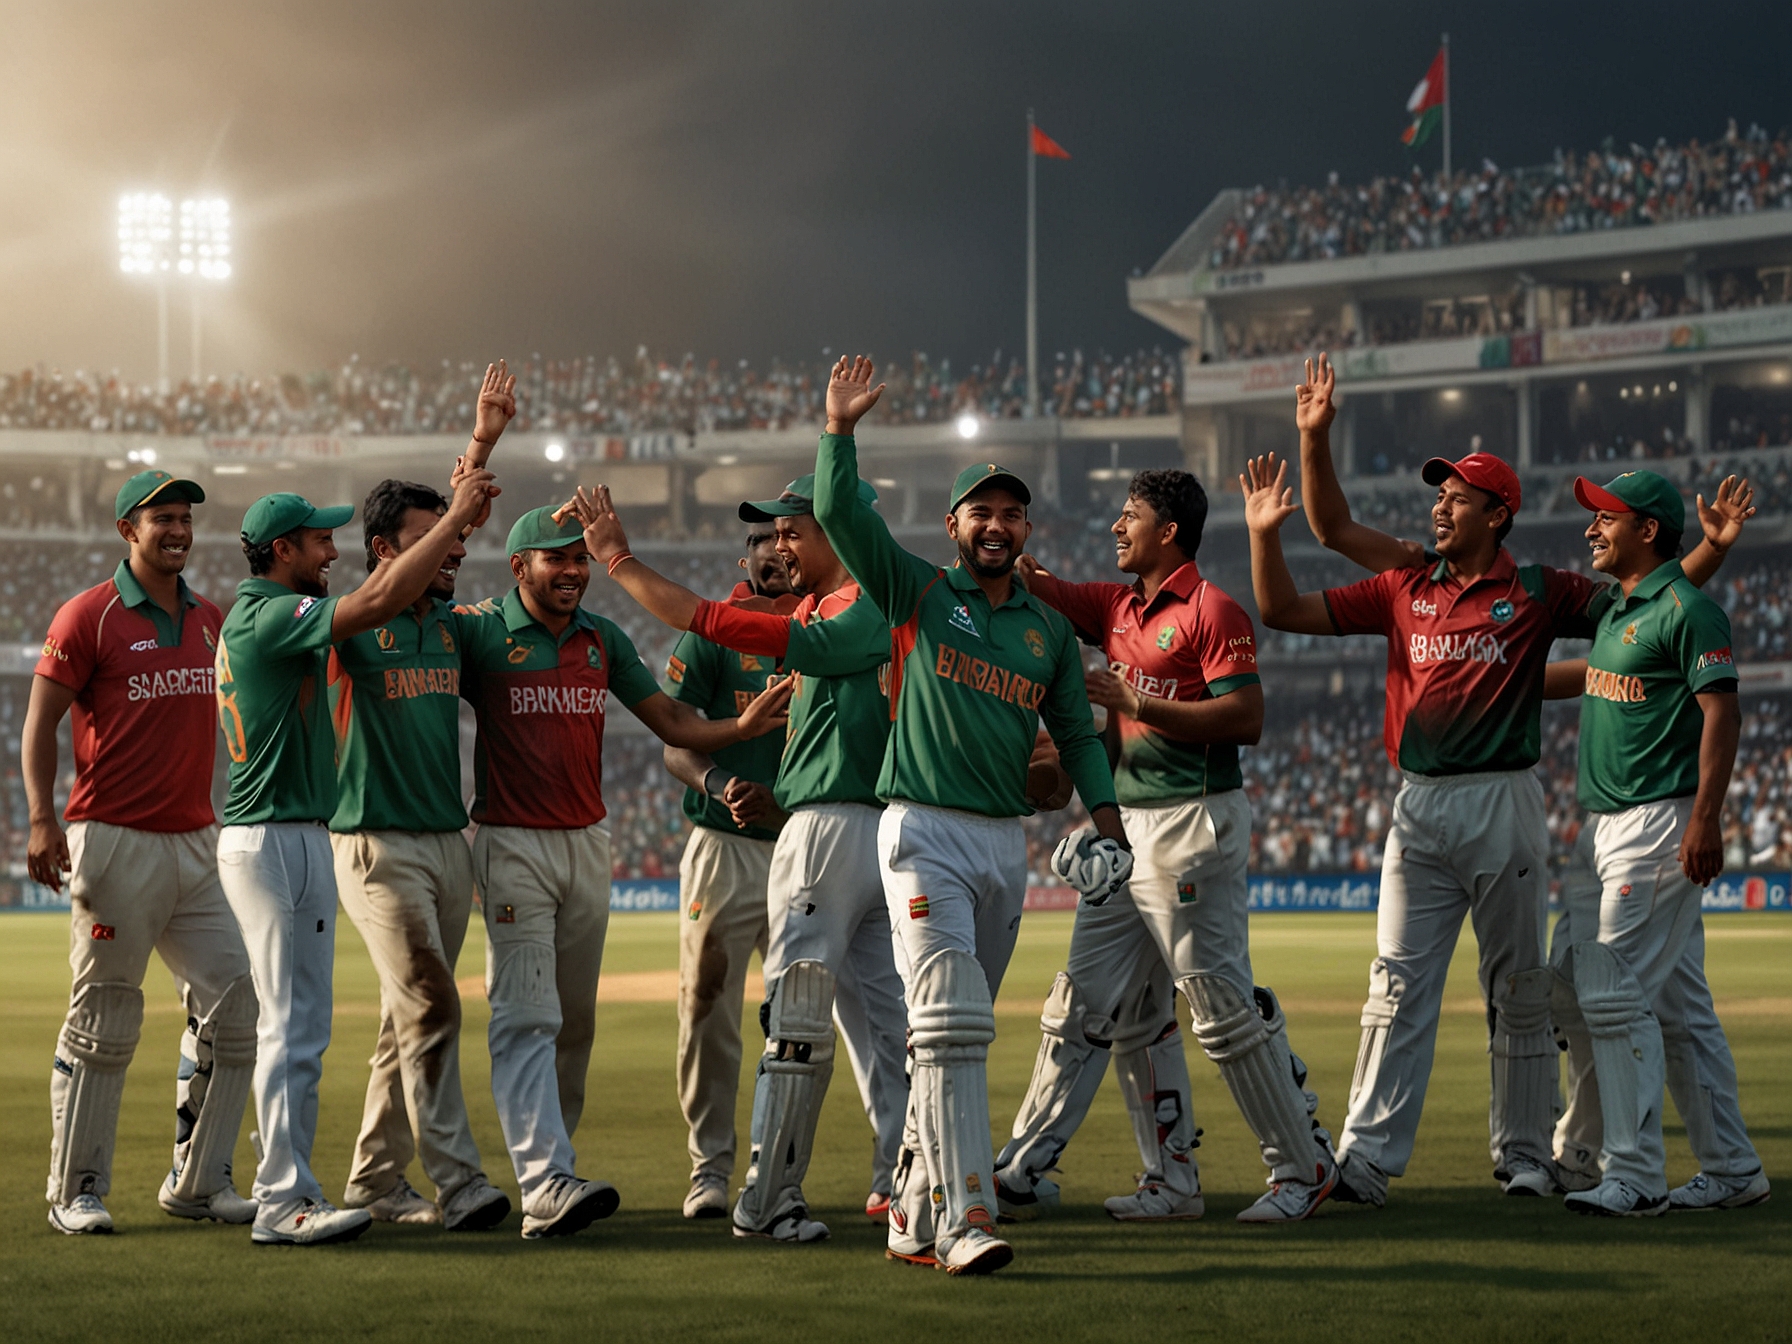 Bangladesh cricket team celebrating their victory on the field after winning against Nepal.